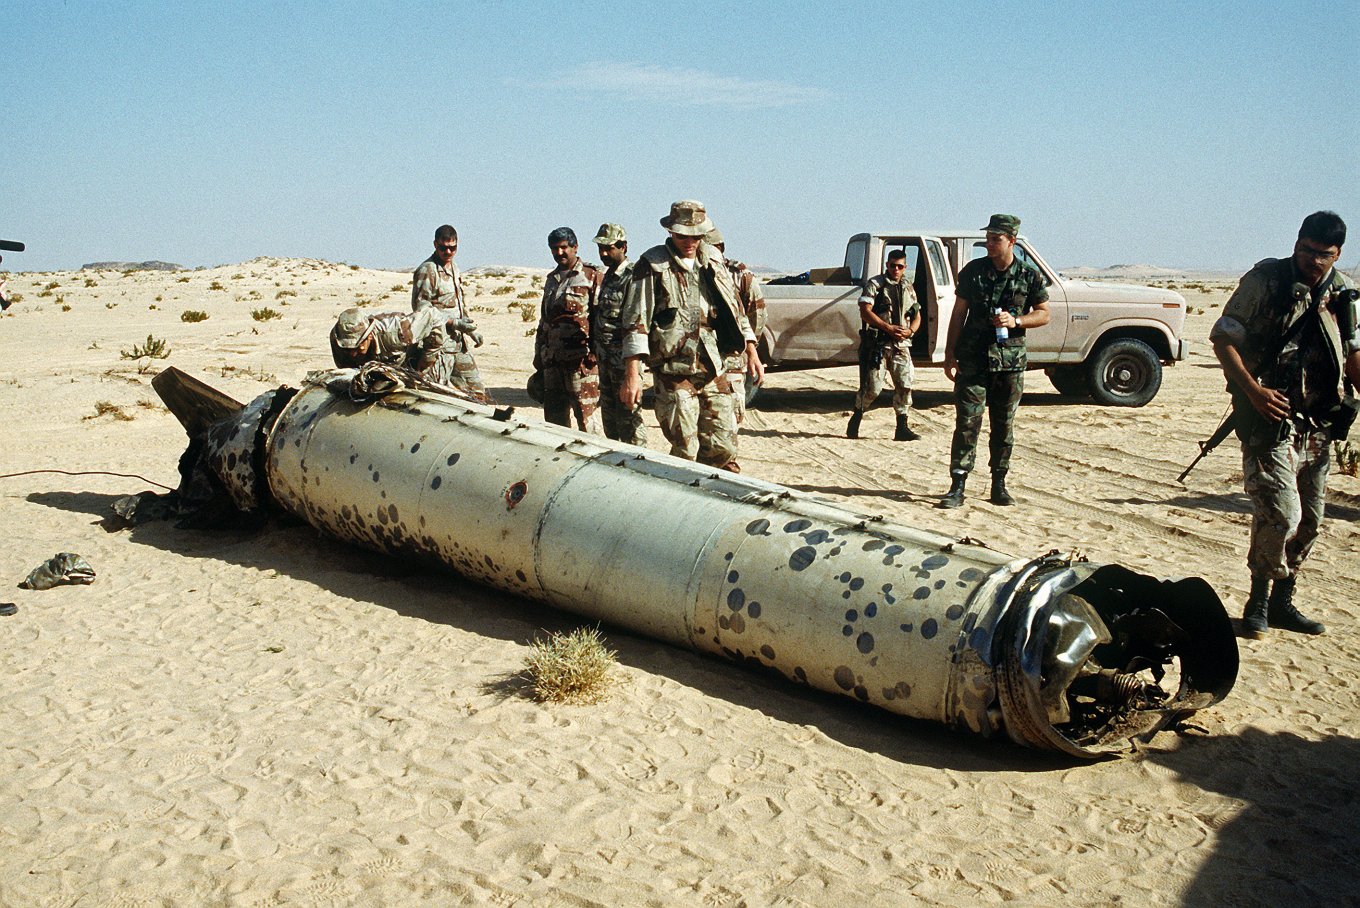 Defence Express / Downed Iraqi SCUD missile during Operation Desert Storm in 1991 / Photo credit: Department of Defense